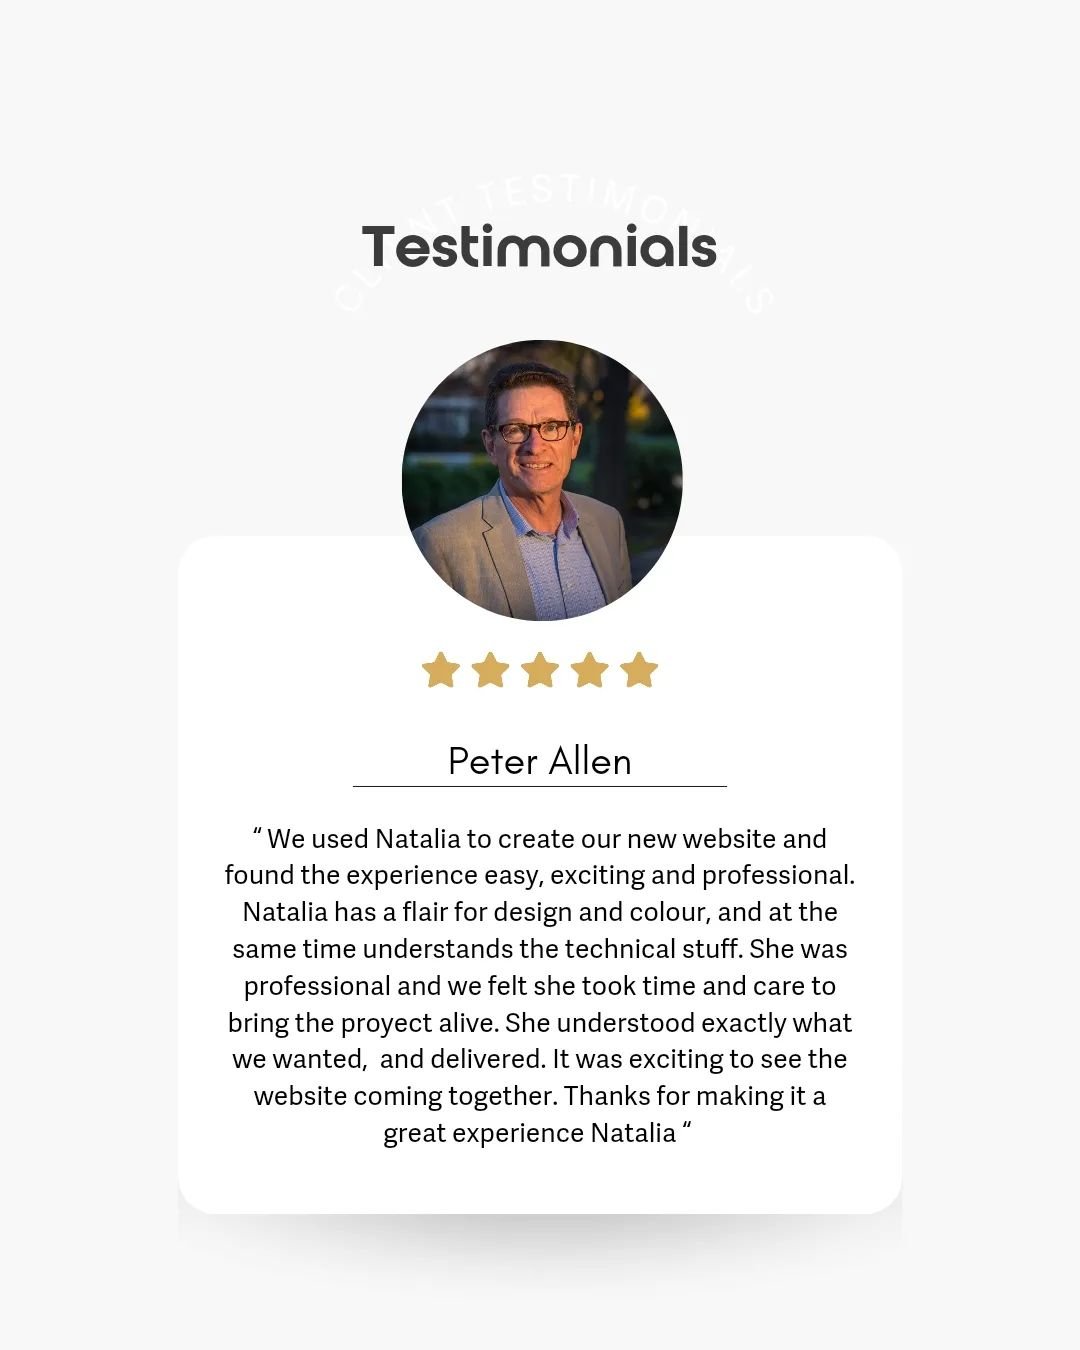 Peter was one of my first clients, and it was a pleasure to work with him and his wife, Alex.

He had a website for his business (Business Torque Systems) in Wordpress but found it hard to navigate and edit. 💻

We swapped to Squarespace (which is mo